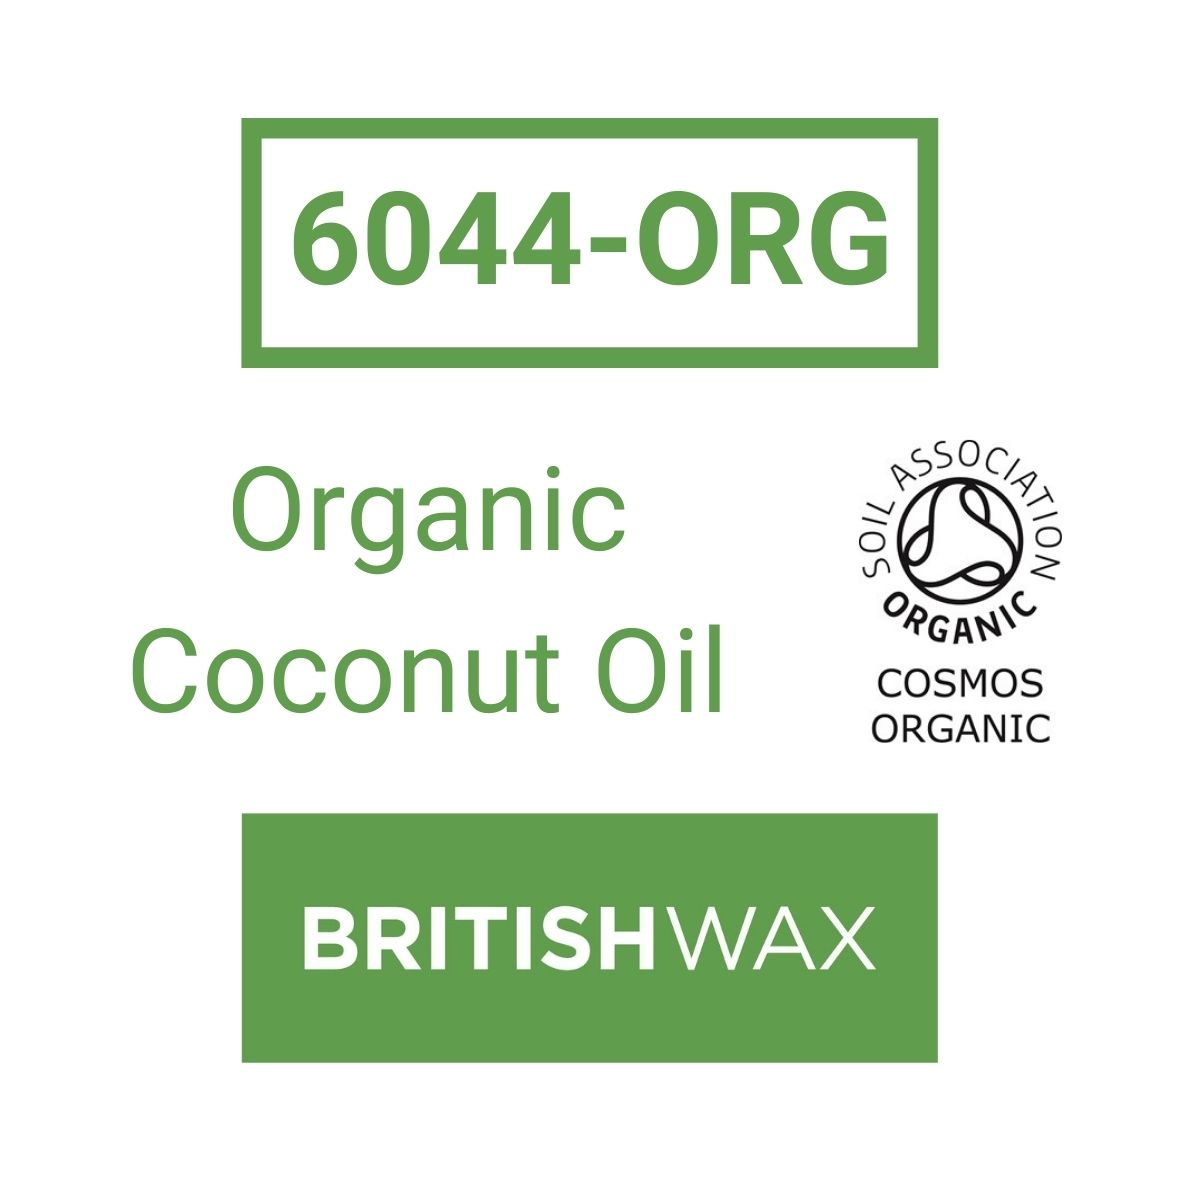 6044-ORG Organic Coconut Oil with Logo